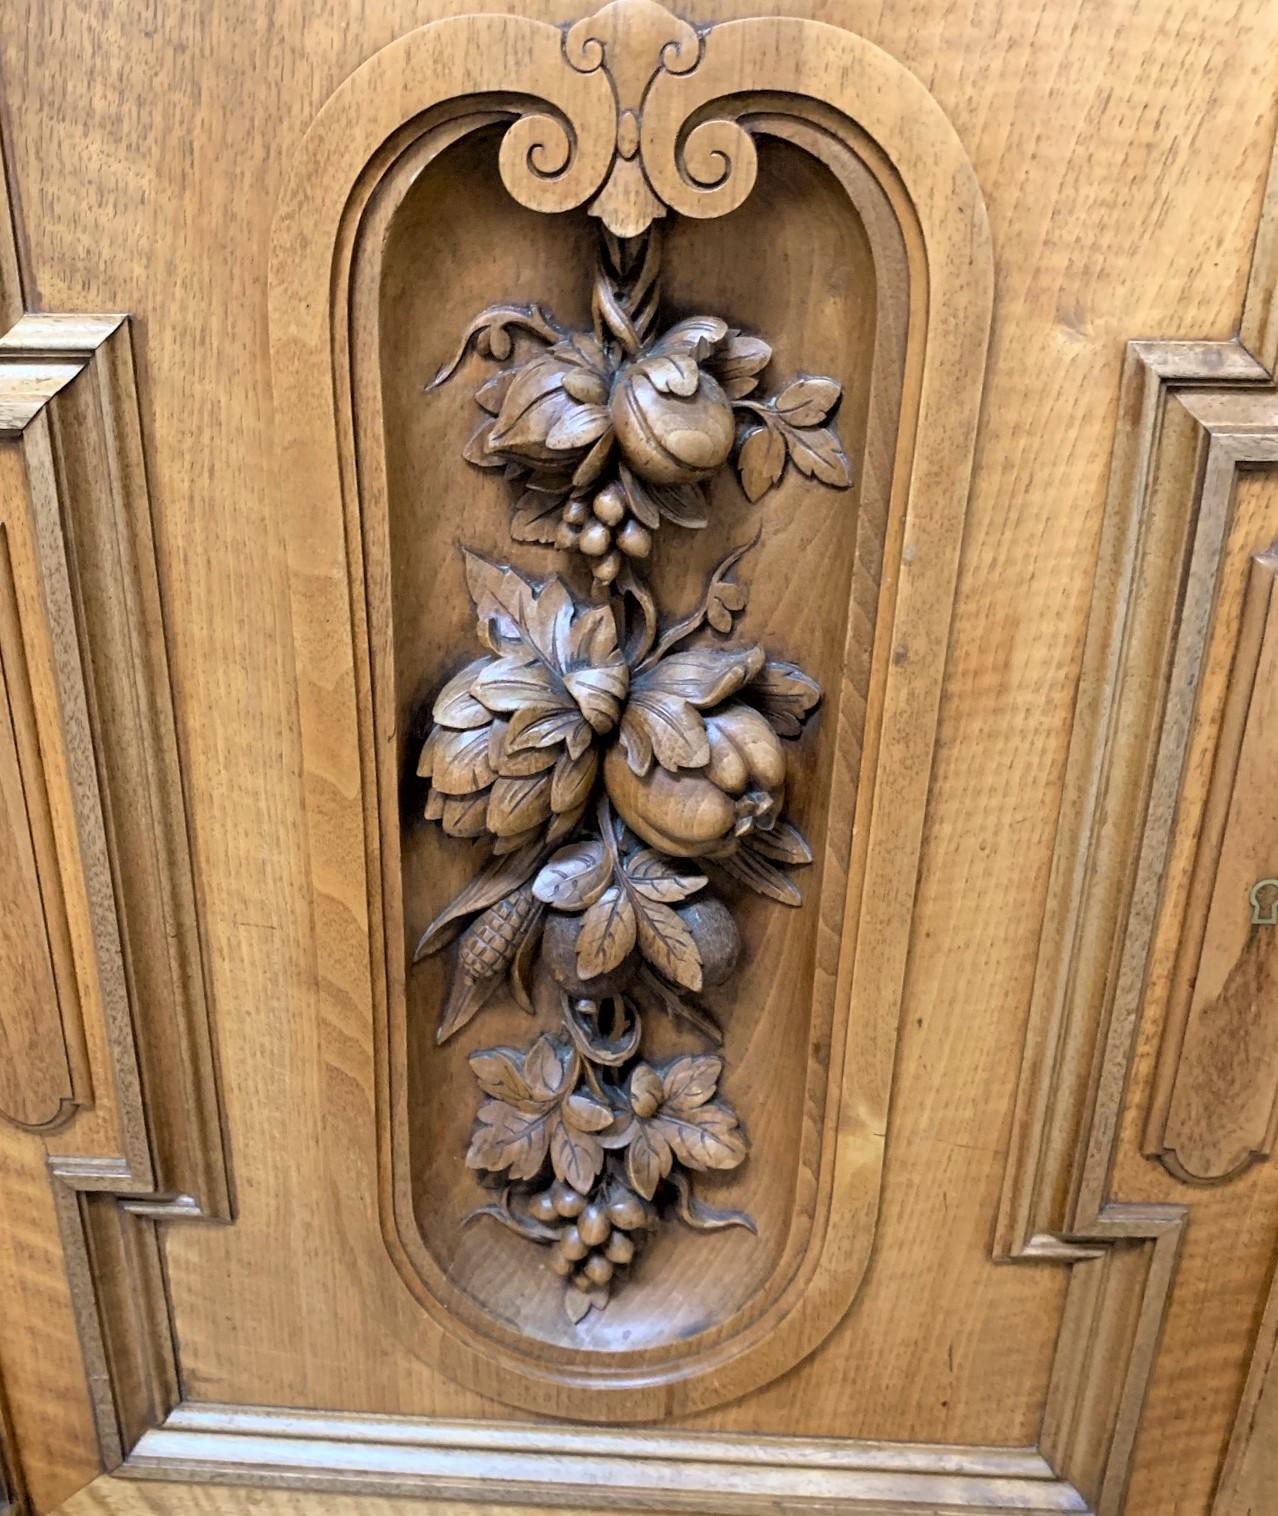 Outstanding 19th century French walnut bookcase cabinet featuring highly detailed carvings of lion heads, fruits, grape leaves, flowers, and a variety of vegetables. The frosted and etched glass double doors rests atop two drawers and two cupboards